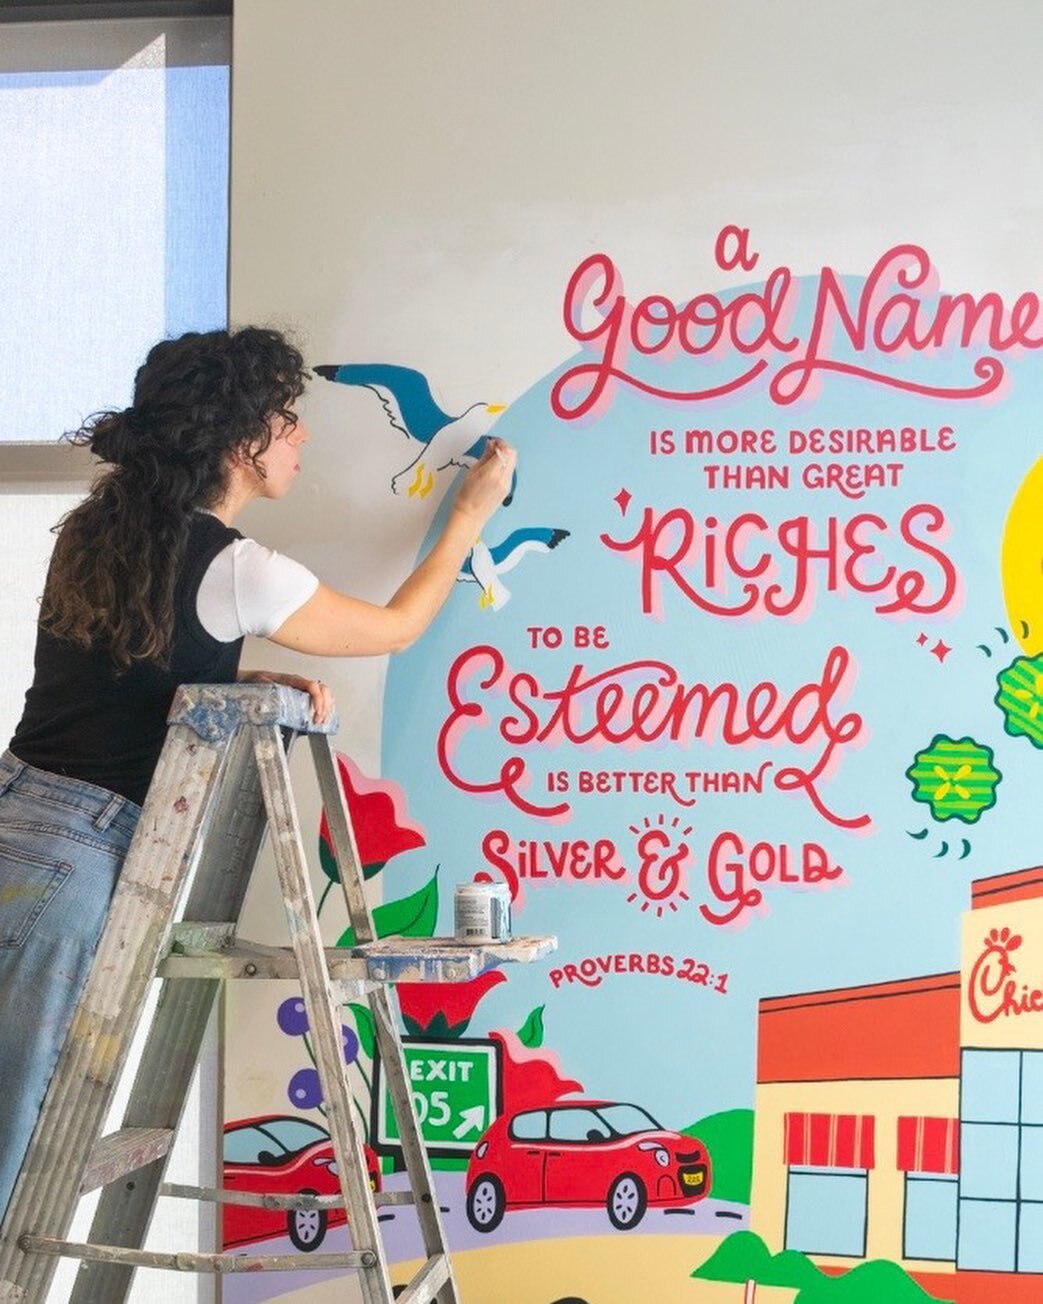 Here&rsquo;s some of the mural painting process at Chick-Fil-A in Eatontown, NJ! @cfaeatontown 

I have to say, this absolutely lovely Chick-Fil-A was not a bad place to spend a couple of days painting. Not bad at all 🐥